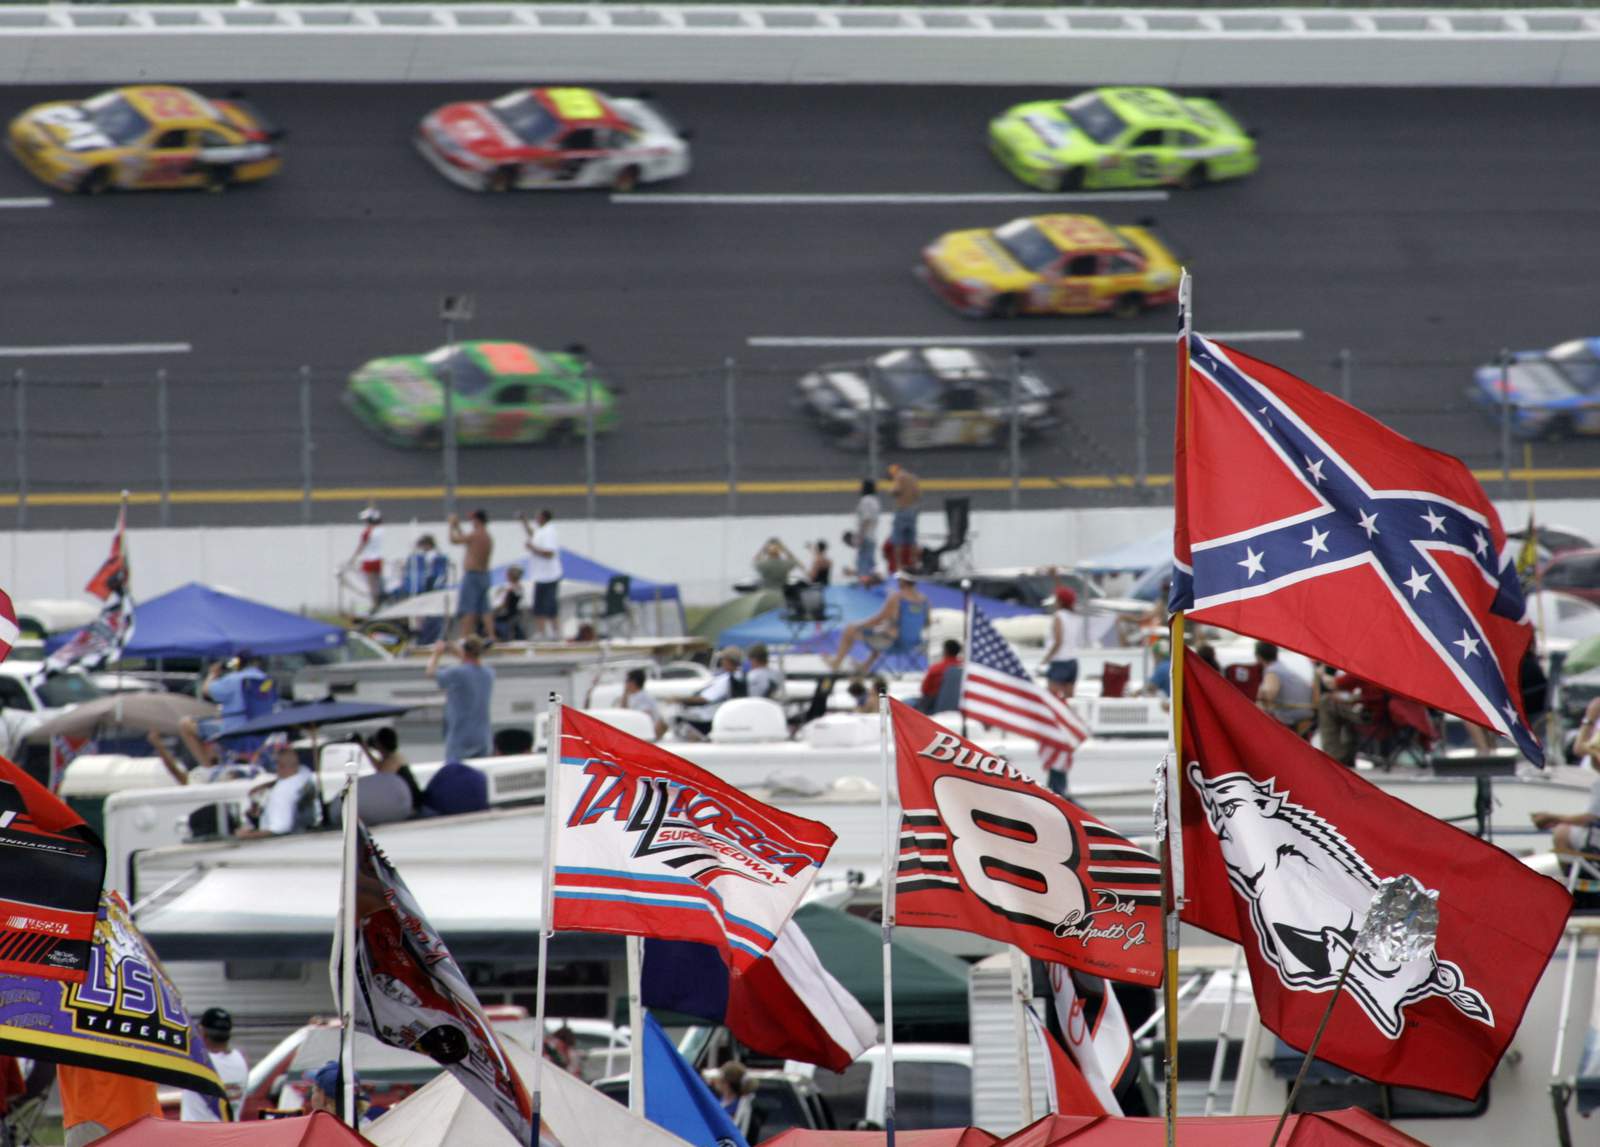 NASCAR has new rules, new feuds and more fans at Talladega